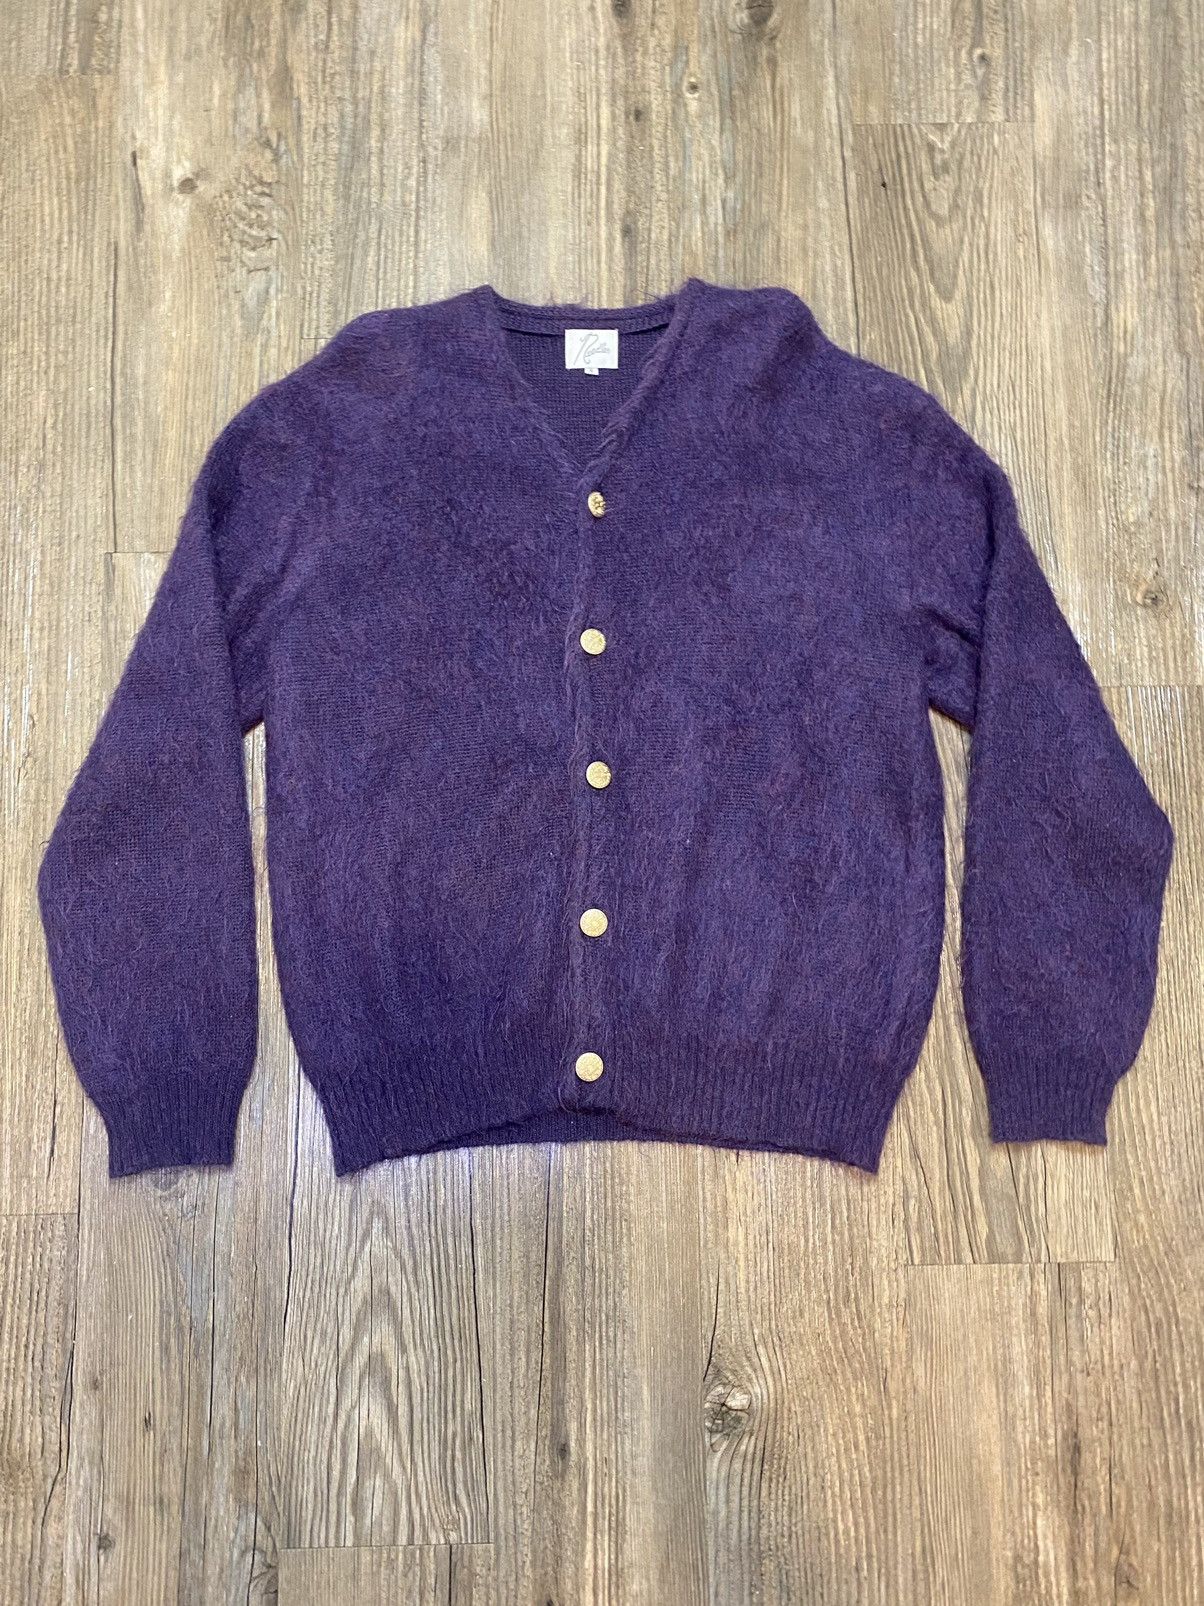 Needles Nepenthes Mohair Purple Cardigan | Grailed